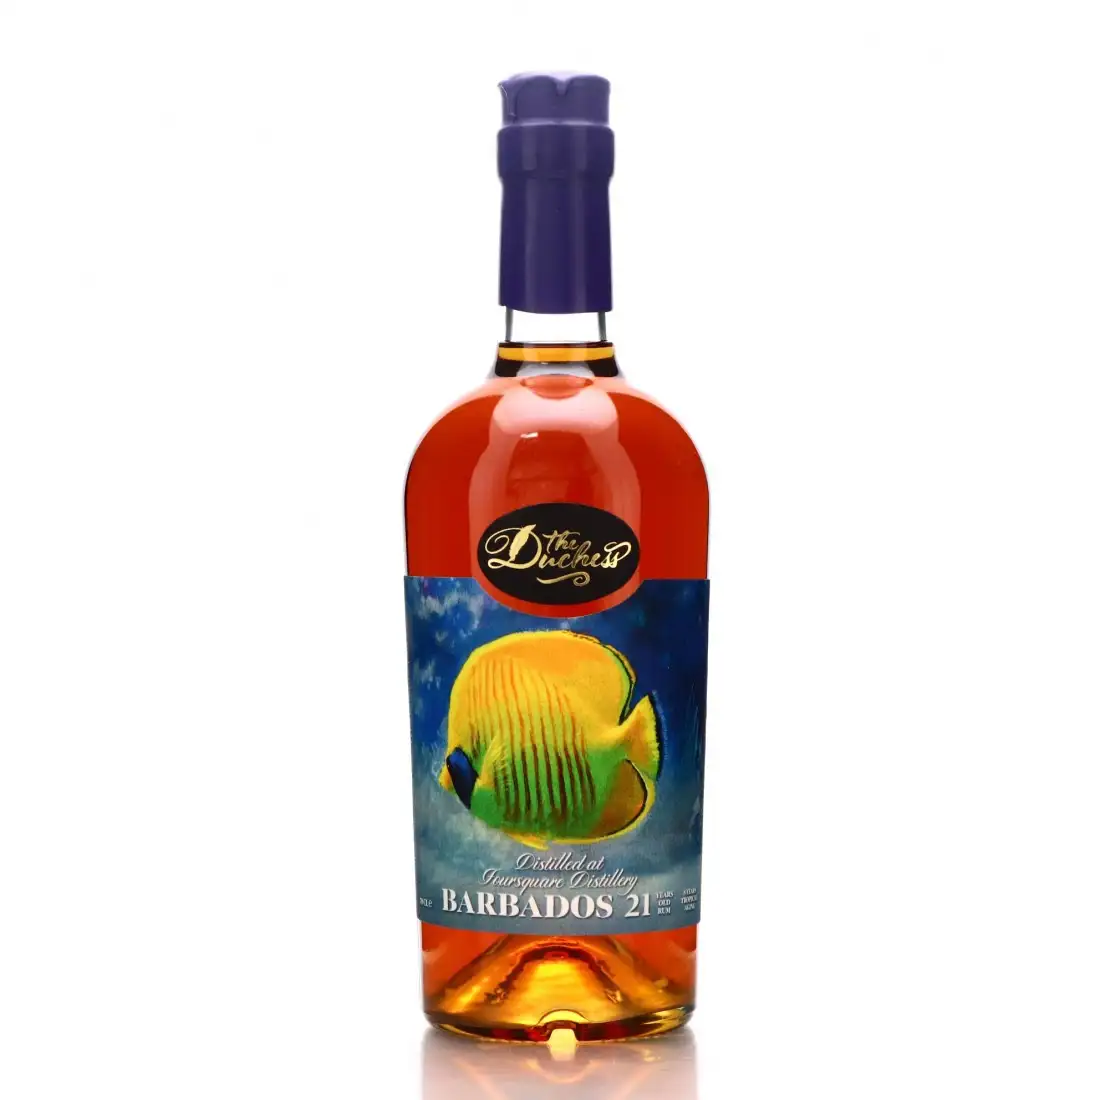 Image of the front of the bottle of the rum Barbados 21